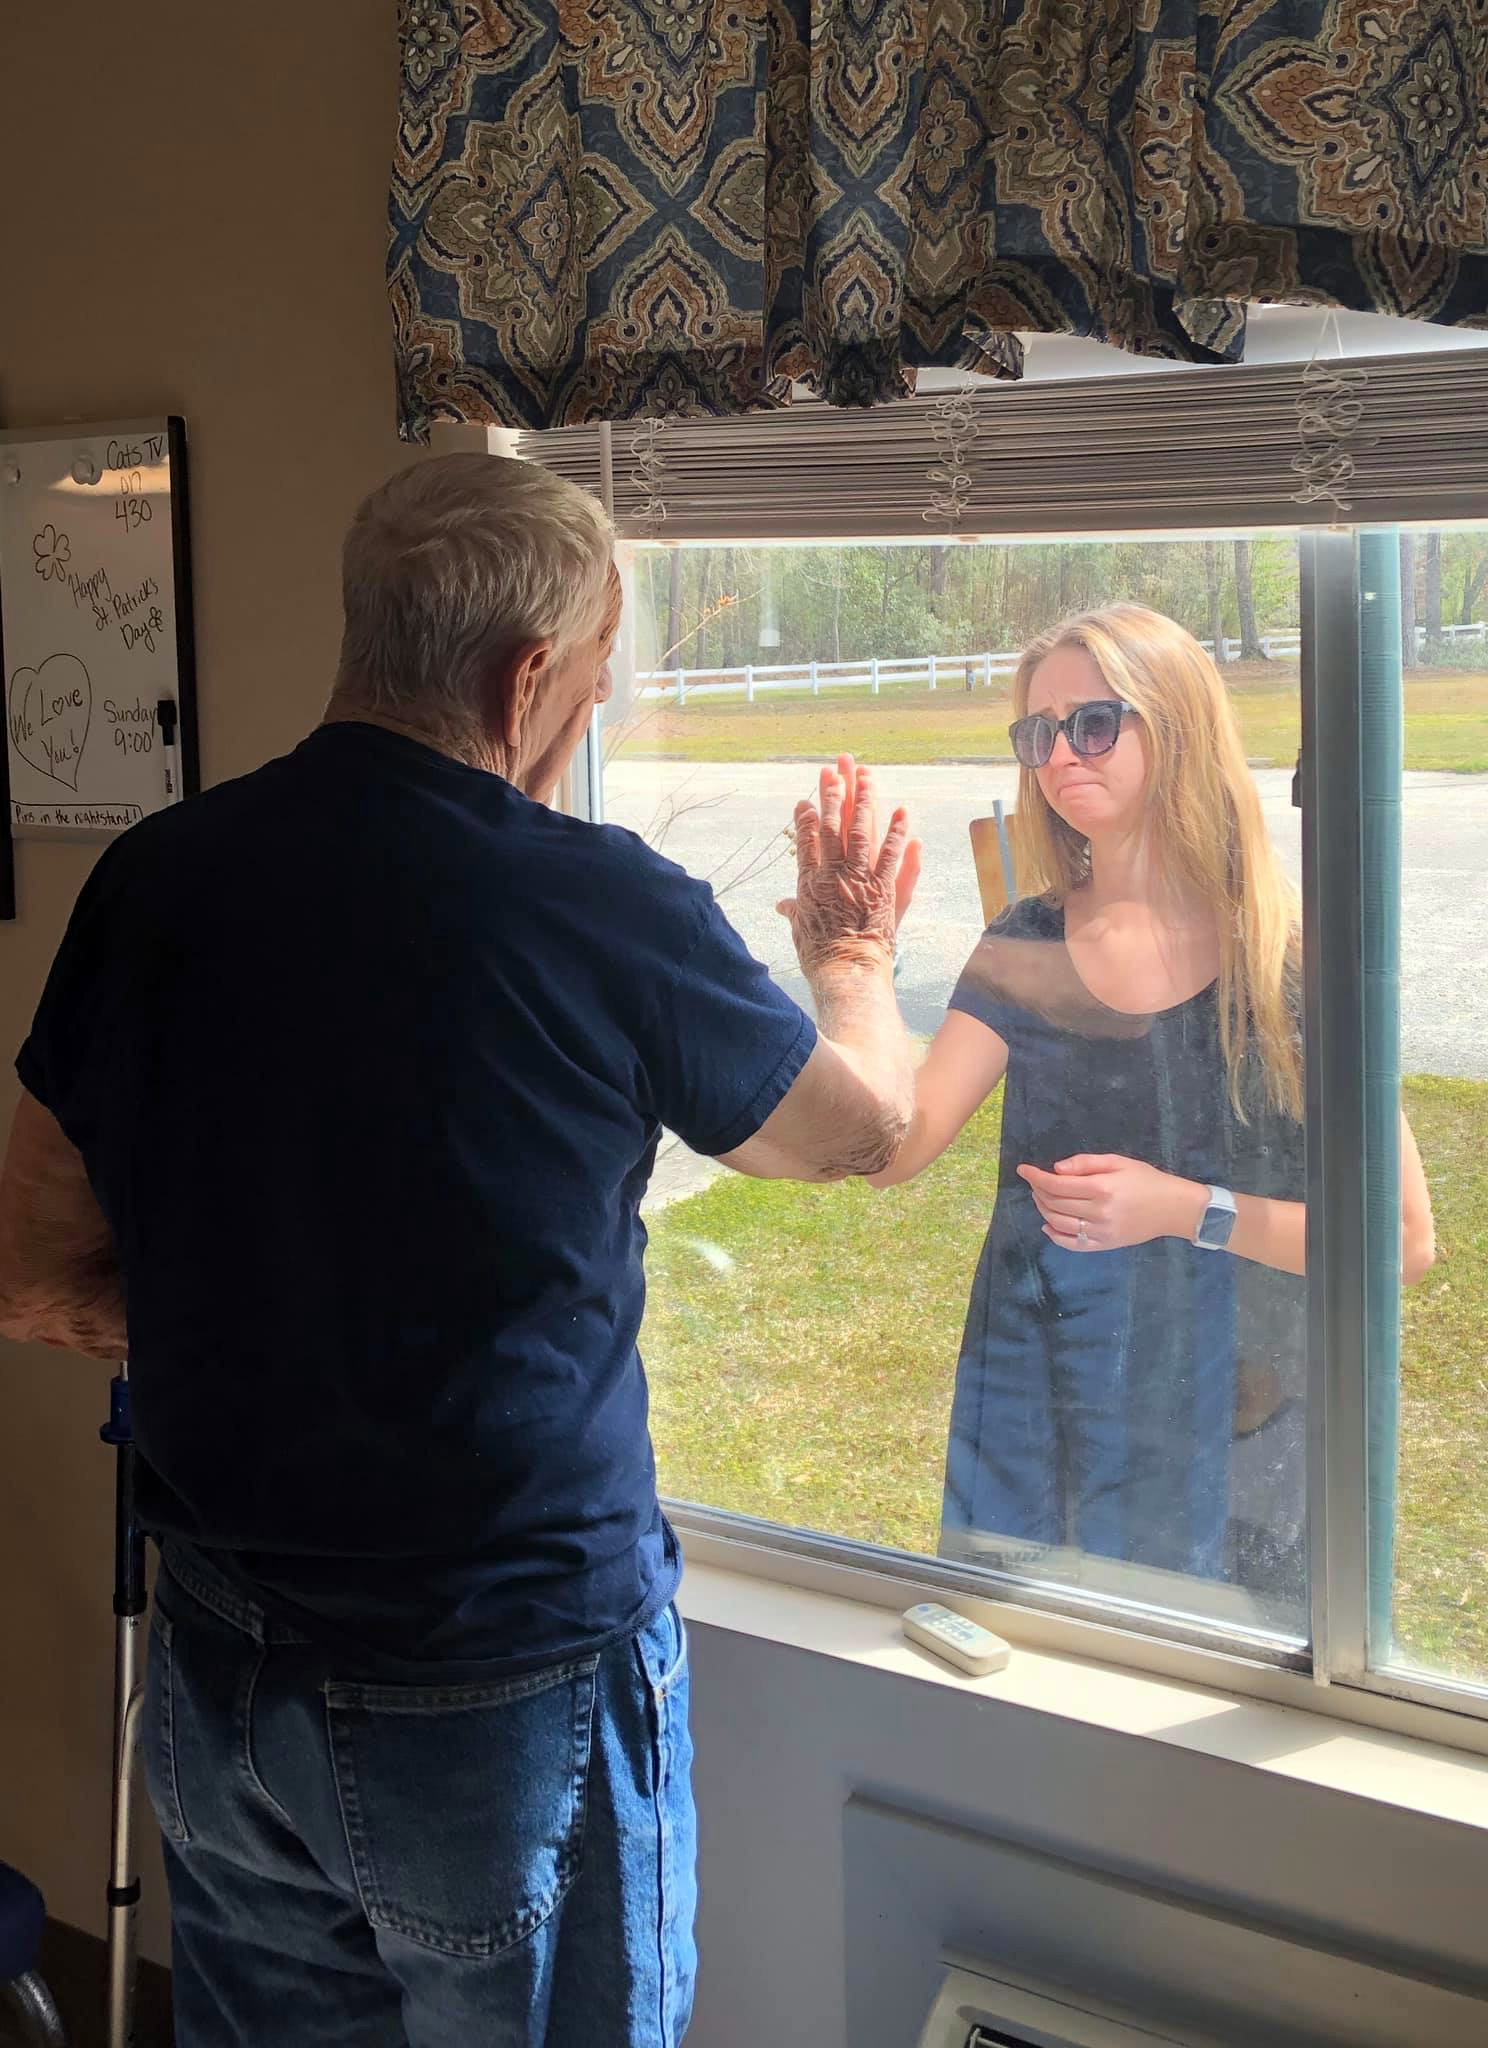 PHOTO: Carly Boyd announces her engagement to her grandfather Shelton Mahala, 87, through his nursing home window in Lake Waccamaw, N.C., in a photo shared on Facebook March 16, 2020.